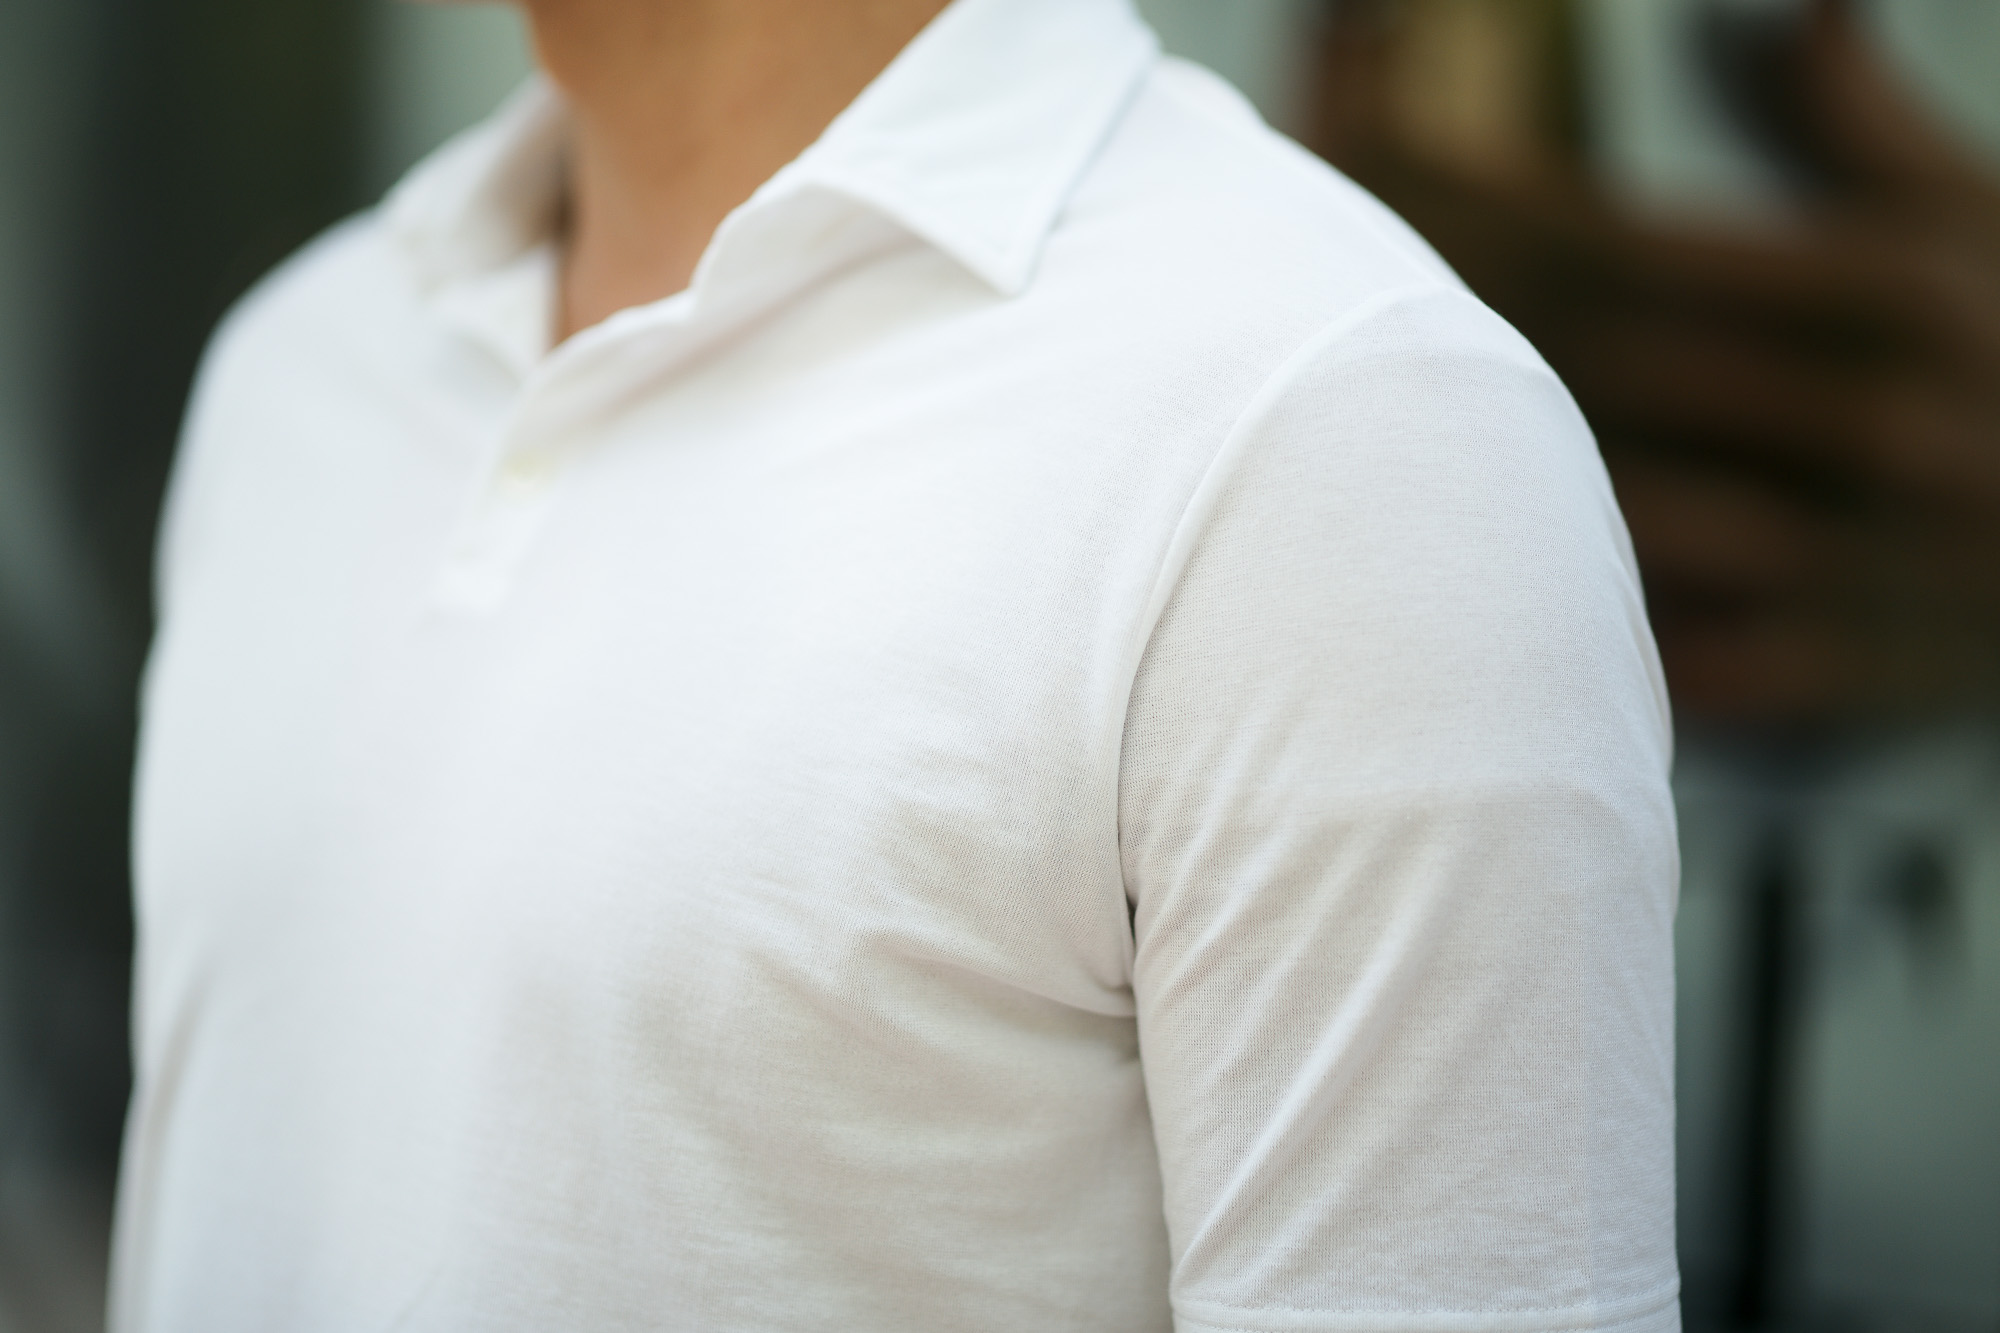 ZANONE(ザノーネ) Polo Shirt ice cotton アイスコットン ポロシャツ WHITE (ホワイト・Z0001) made in italy (イタリア製) 2020春夏新作 愛知 名古屋 altoediritto アルトエデリット" wid